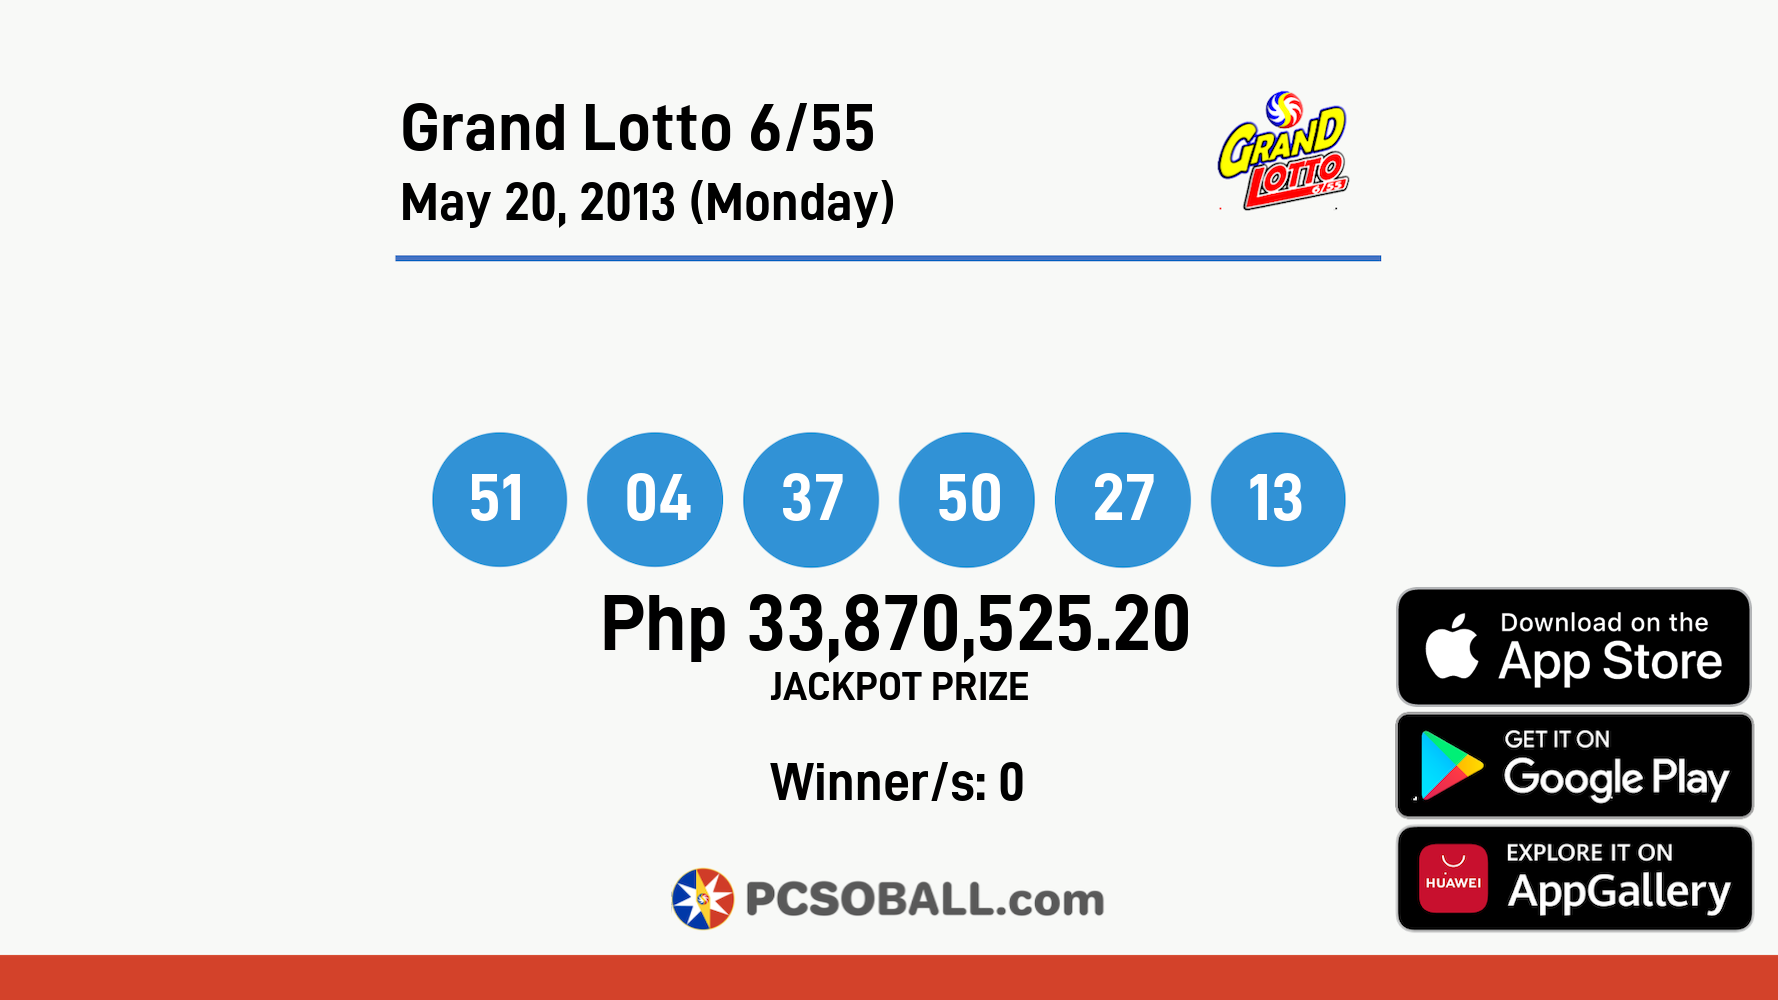 Grand Lotto 6/55 May 20, 2013 (Monday) Result